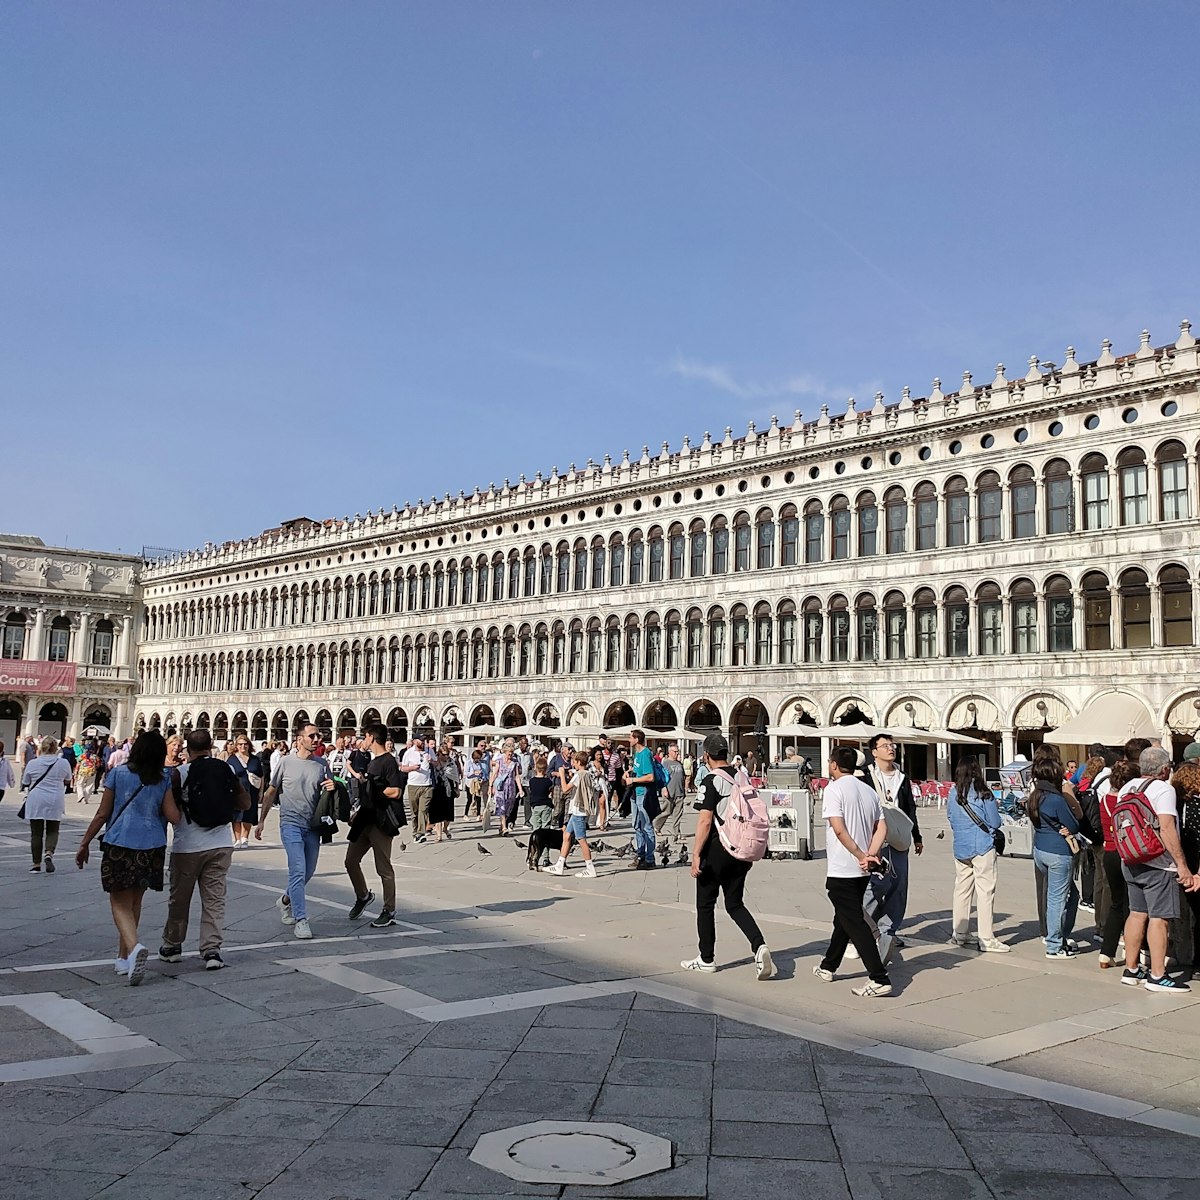 The National Archaeological Museum is a museum in Venice. The building that encloses the far end of the Piazza San Marco